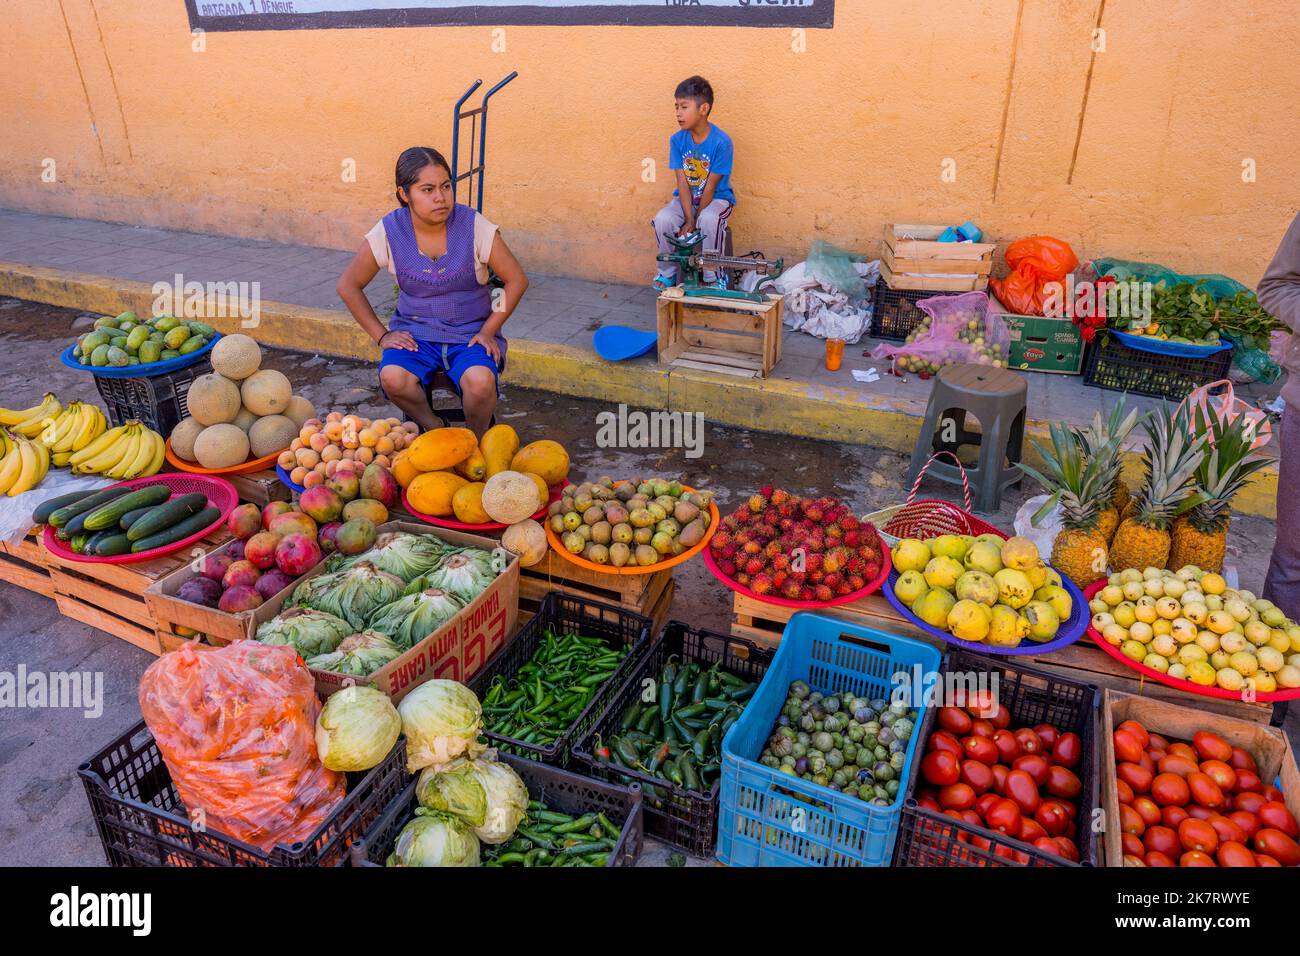 A produce stand on the daily market in Teotitlan del Valle, a small town in the Valles Centrales Region near Oaxaca, southern Mexico. Stock Photo